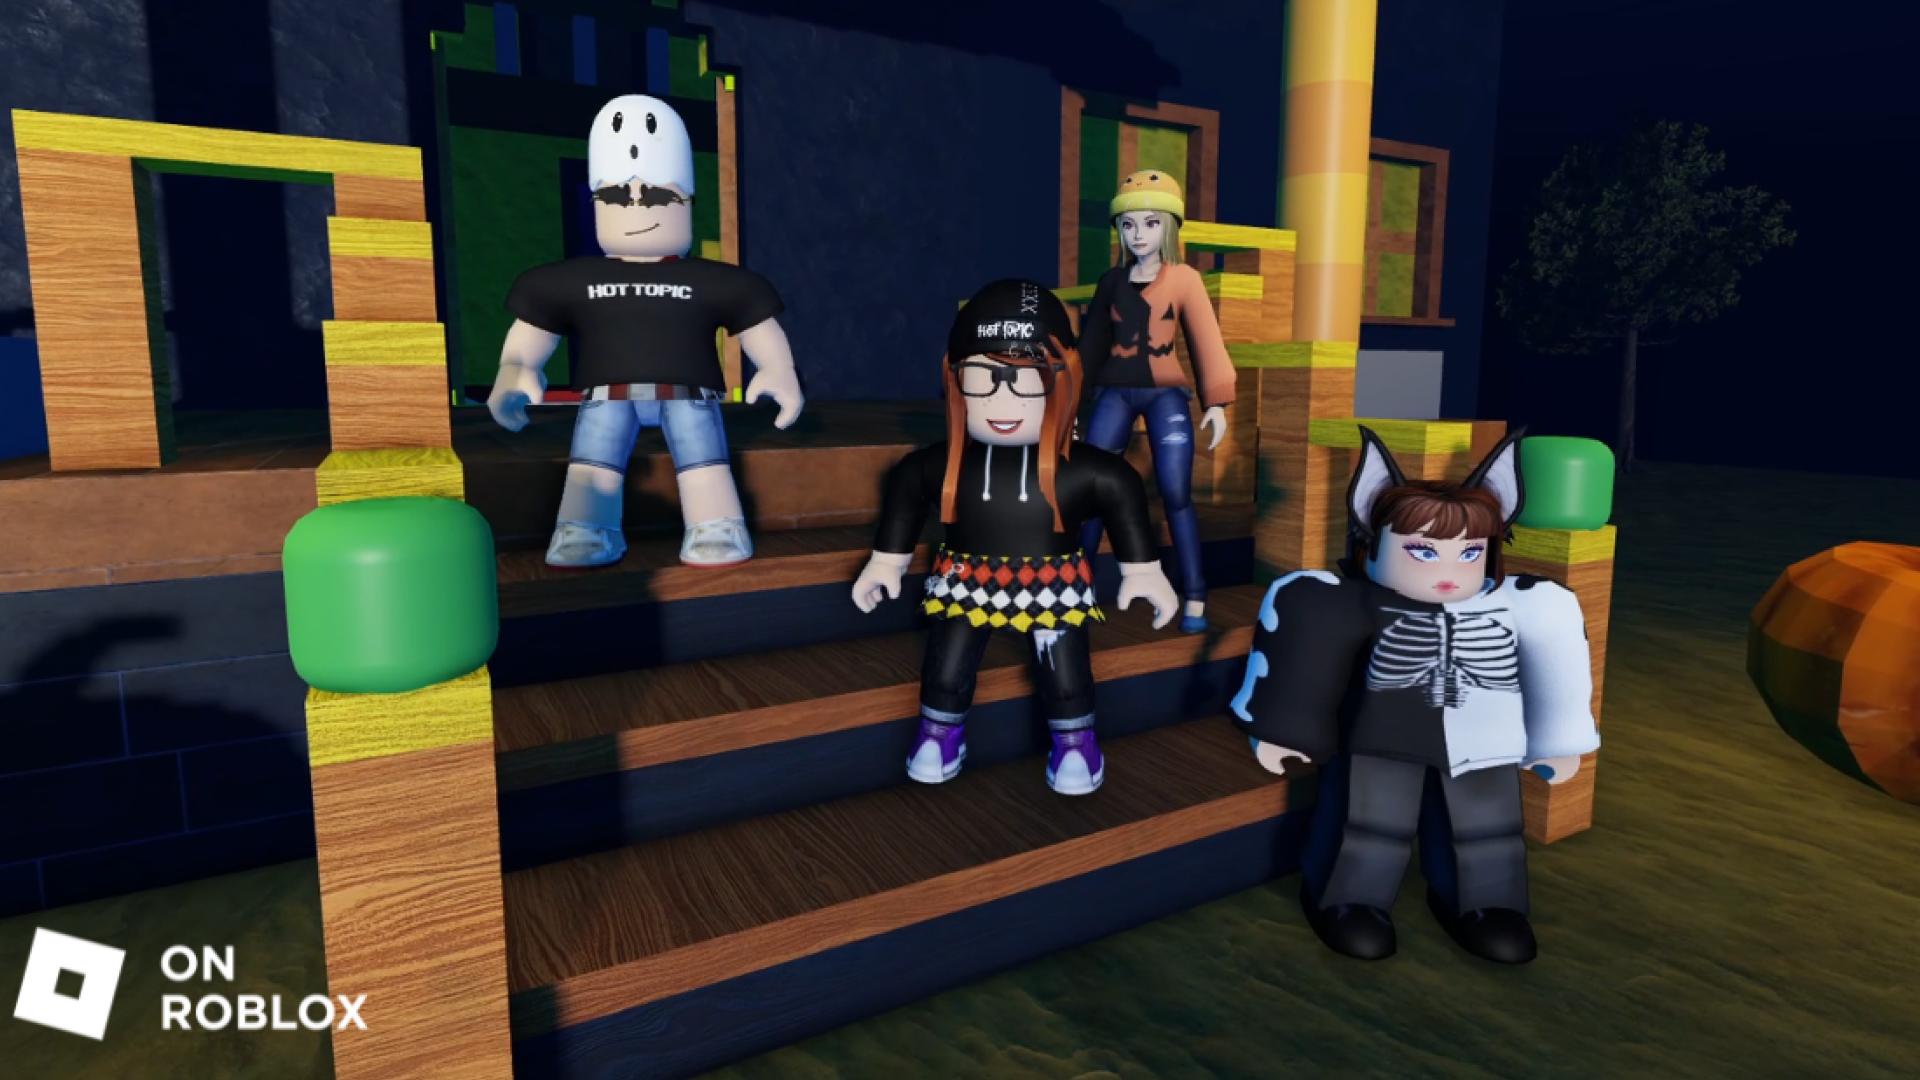 Why is Roblox so important to the metaverse?